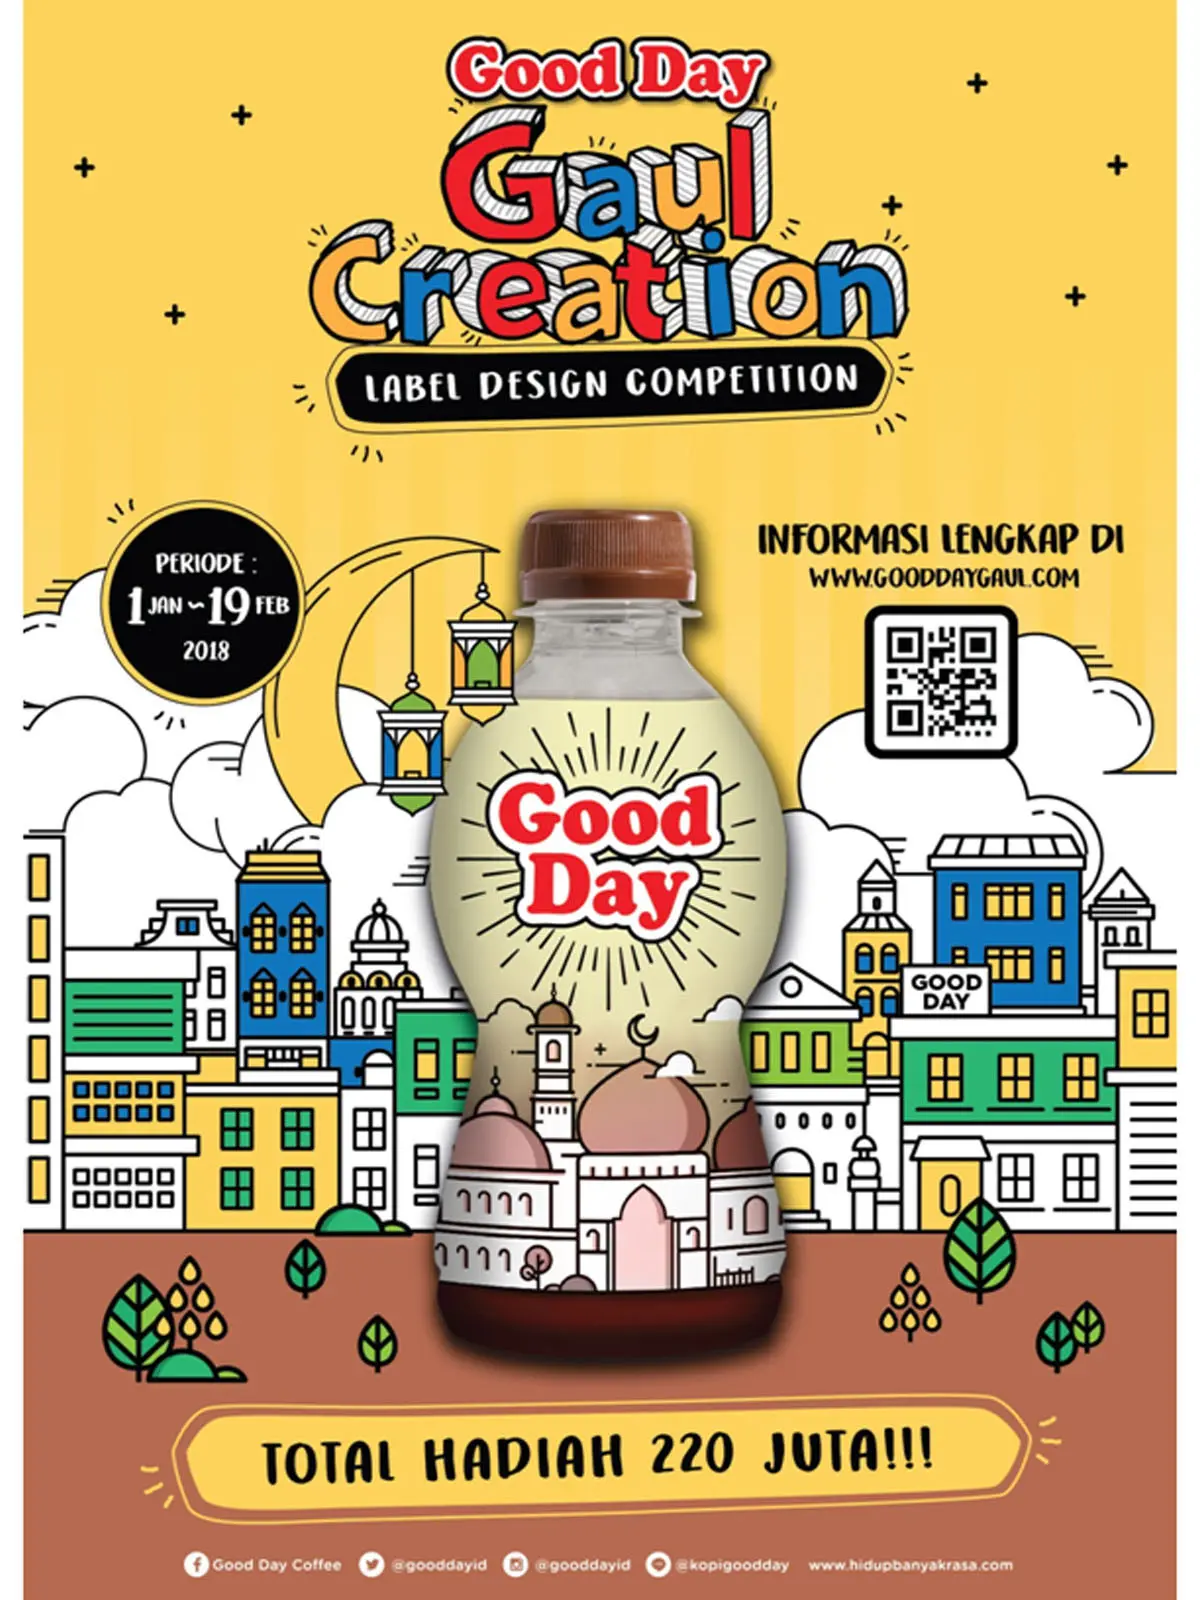 Good Day Gaul Creation - Label Design Competition